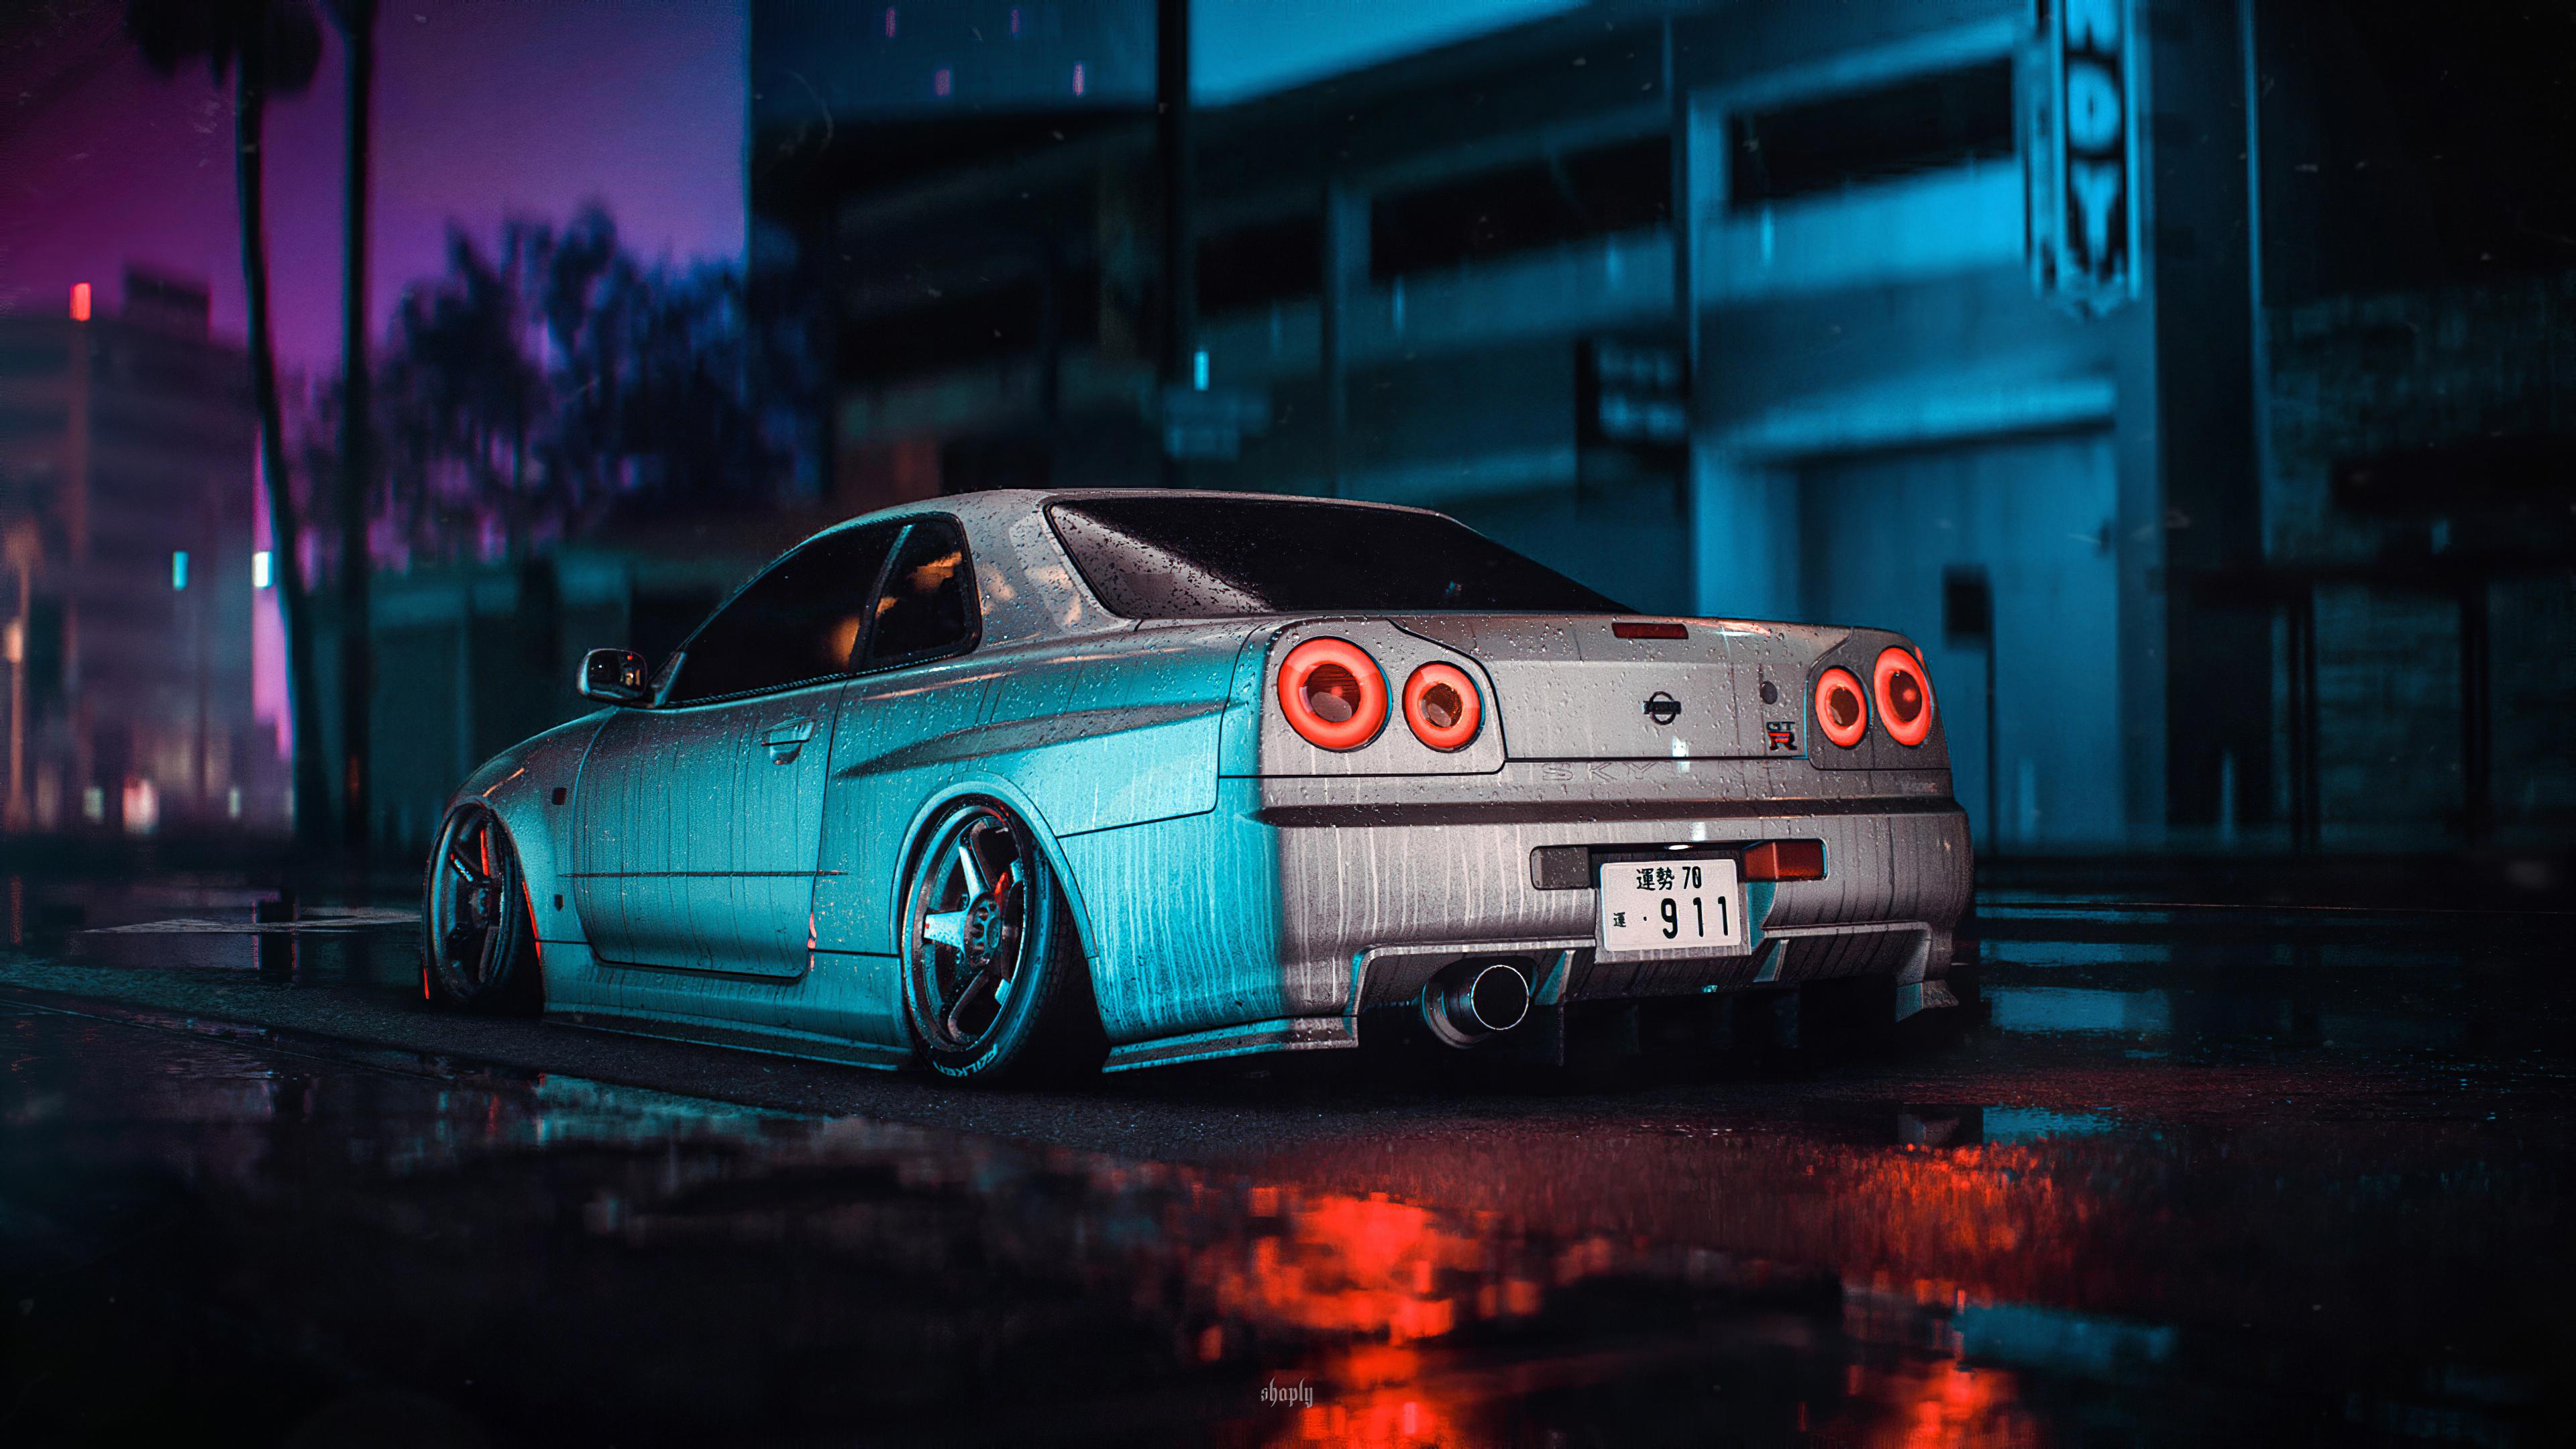 Skyline 4K wallpaper for your desktop or mobile screen free and easy to download